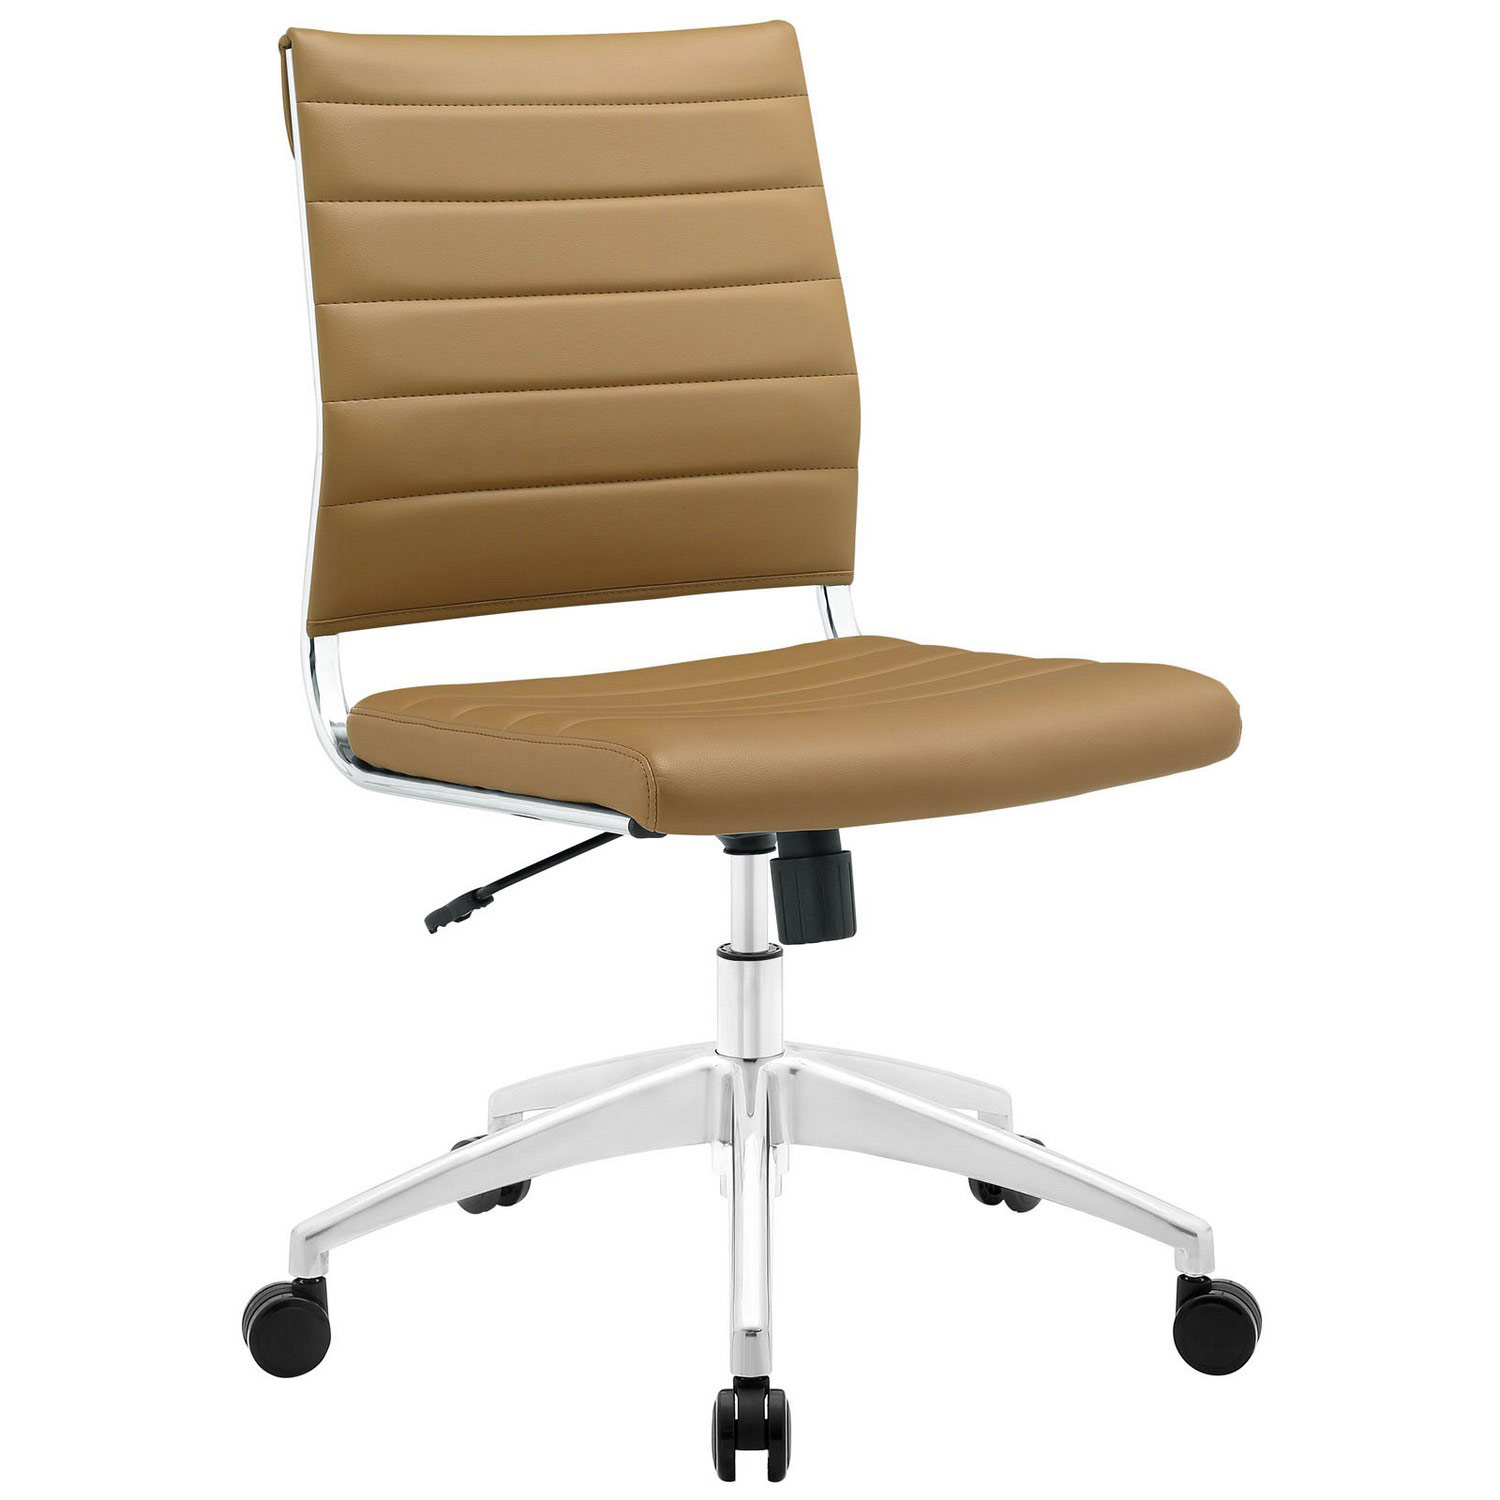 Modway Jive Armless Mid Back Office Chair - Tan